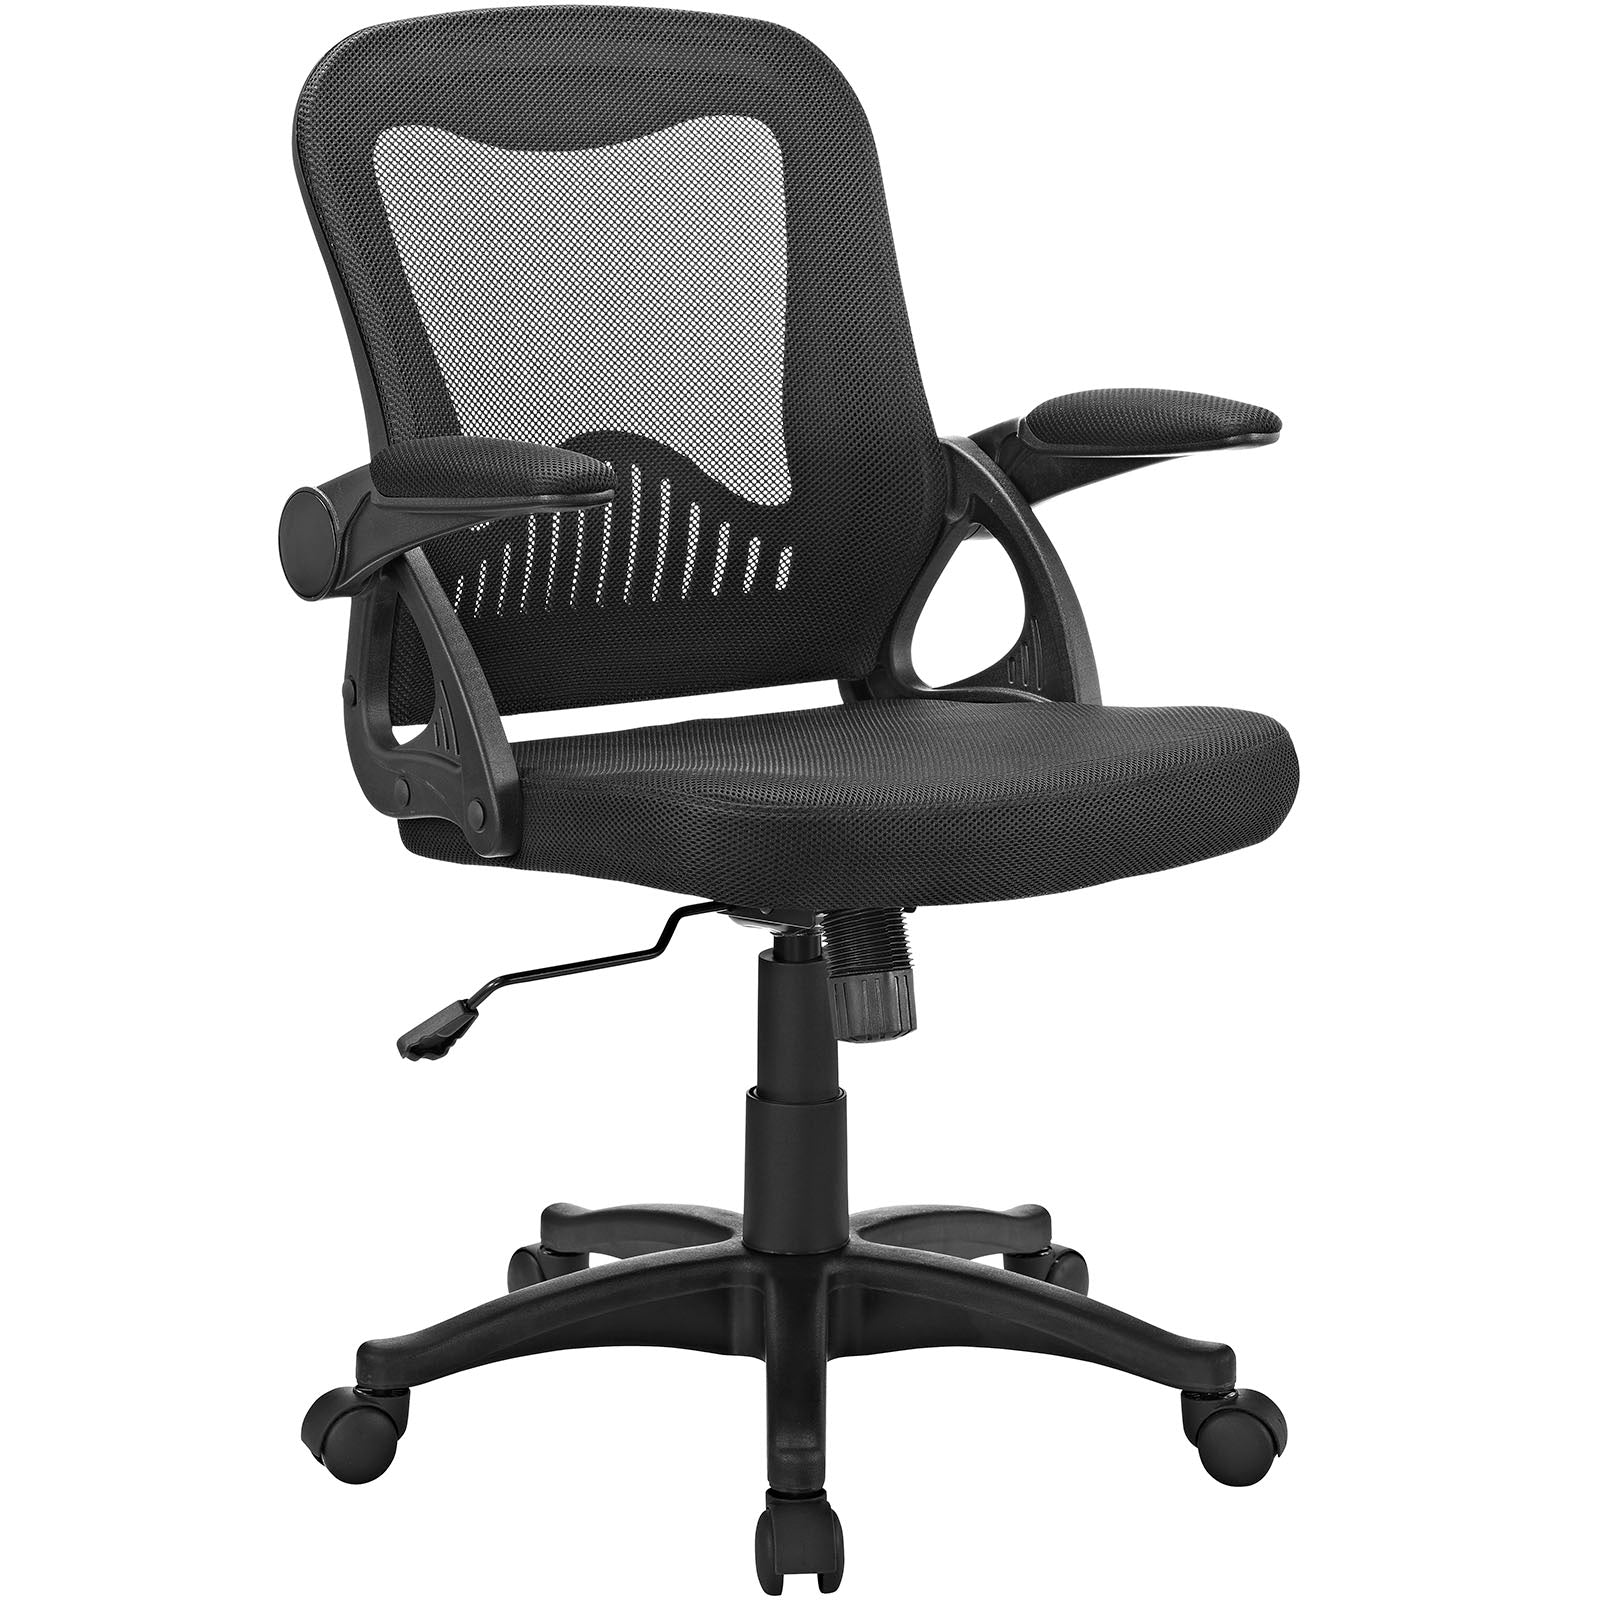 Modway Task Chairs - Advance Office Chair Black